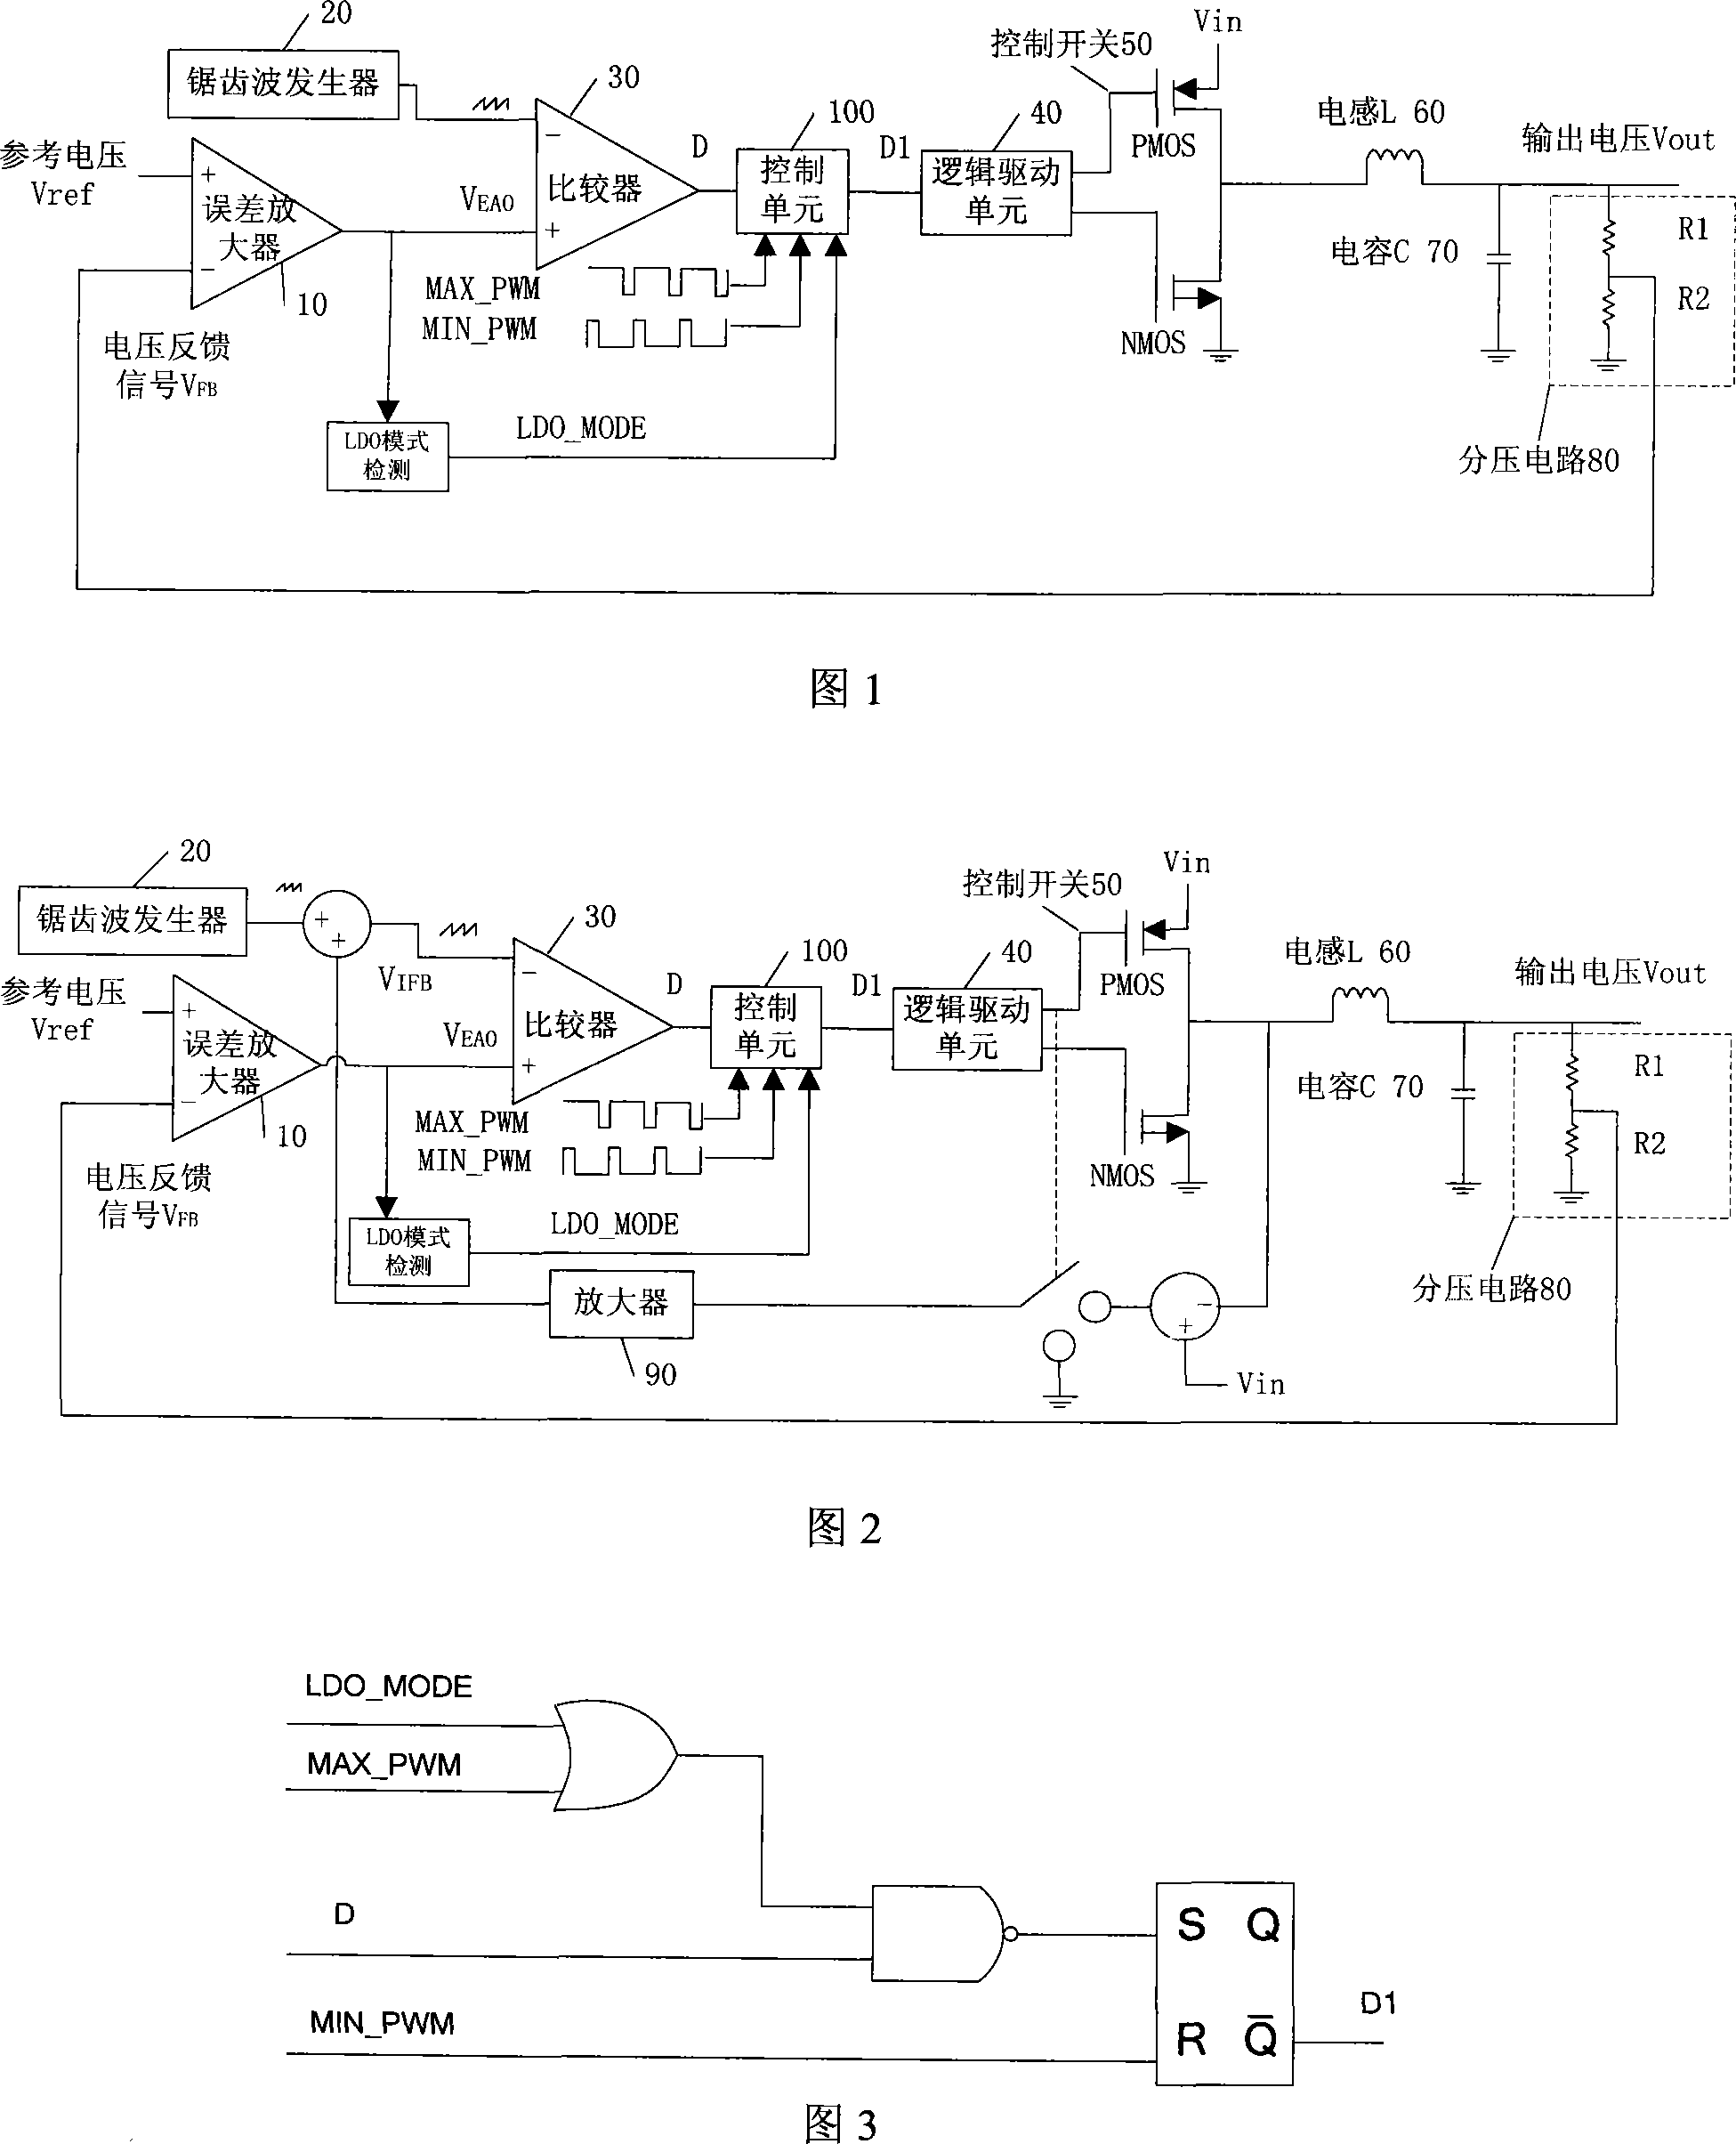 Direct current switch power supply control circuit